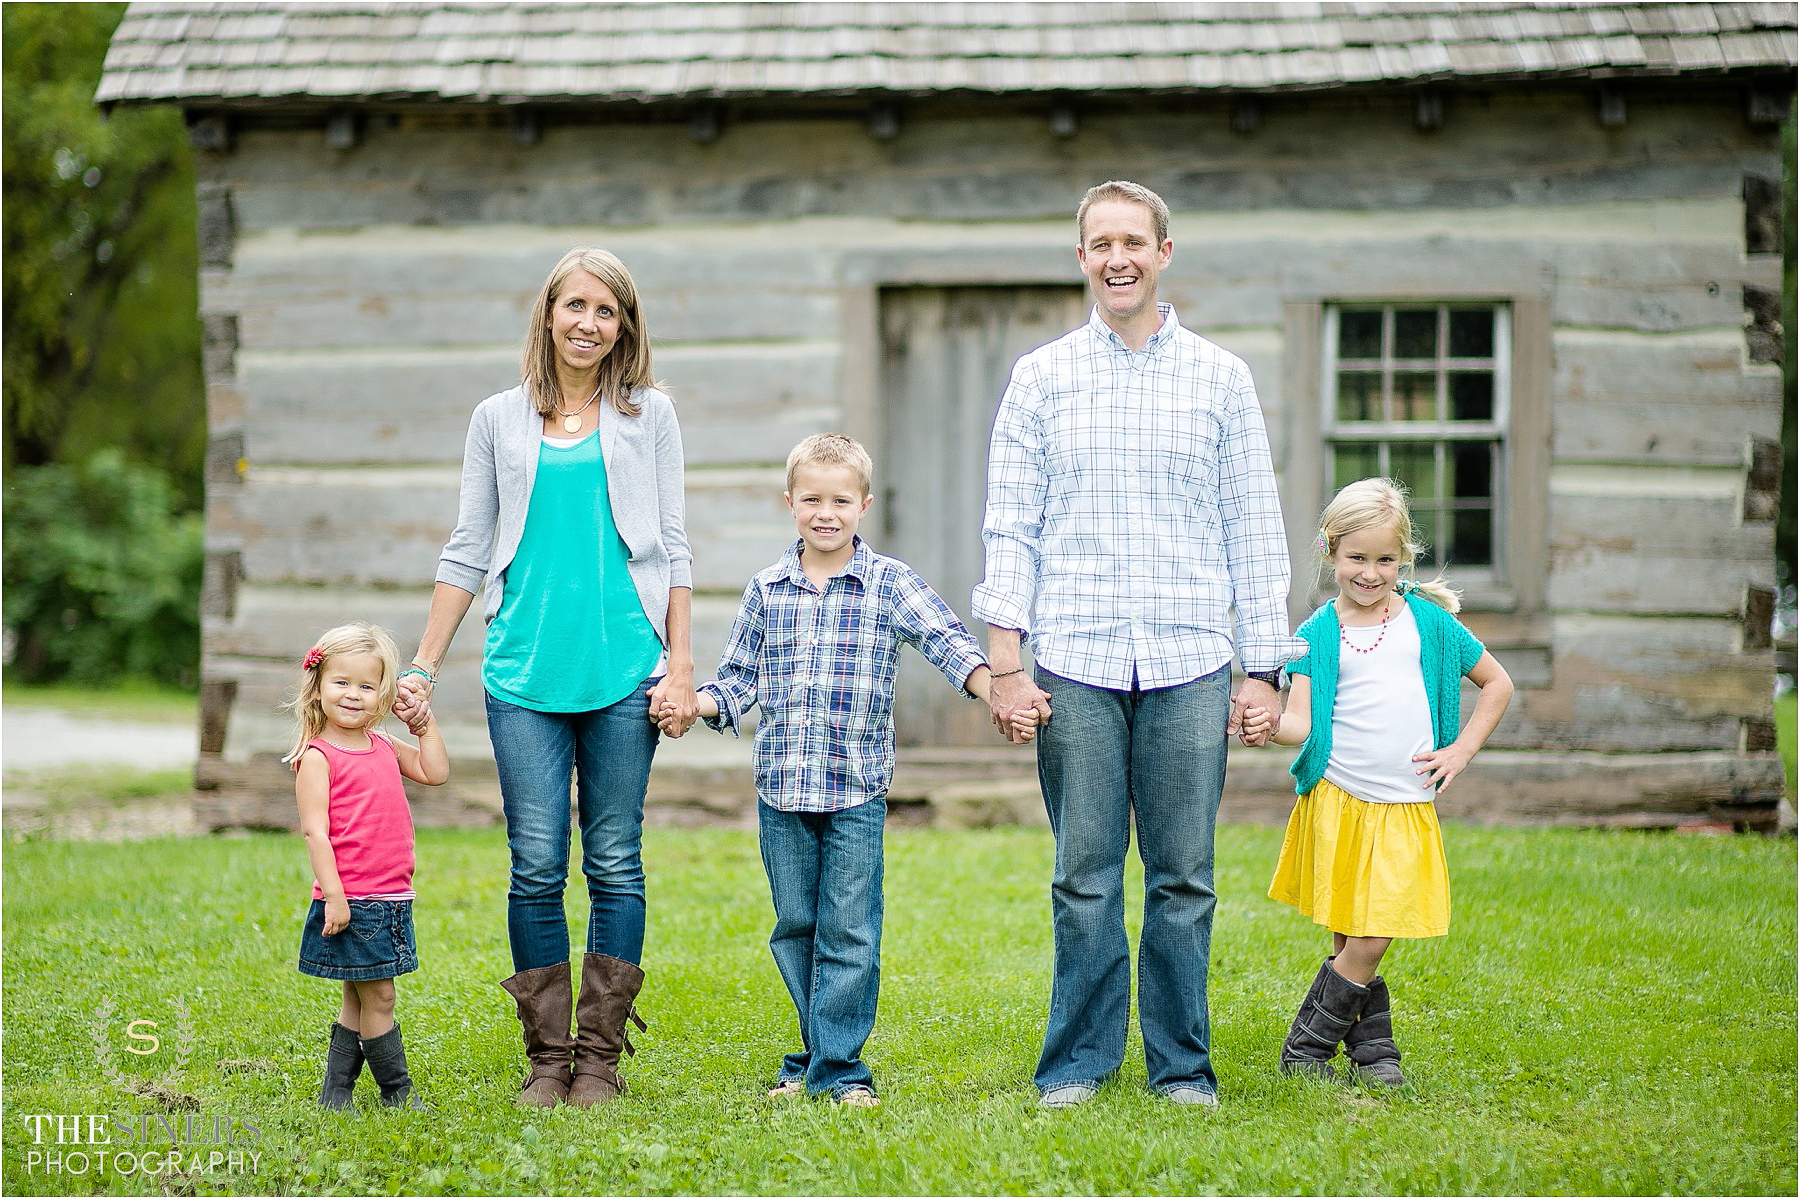 Okland Family Indianapolis Family Photography_TheSinersPhotography_0026